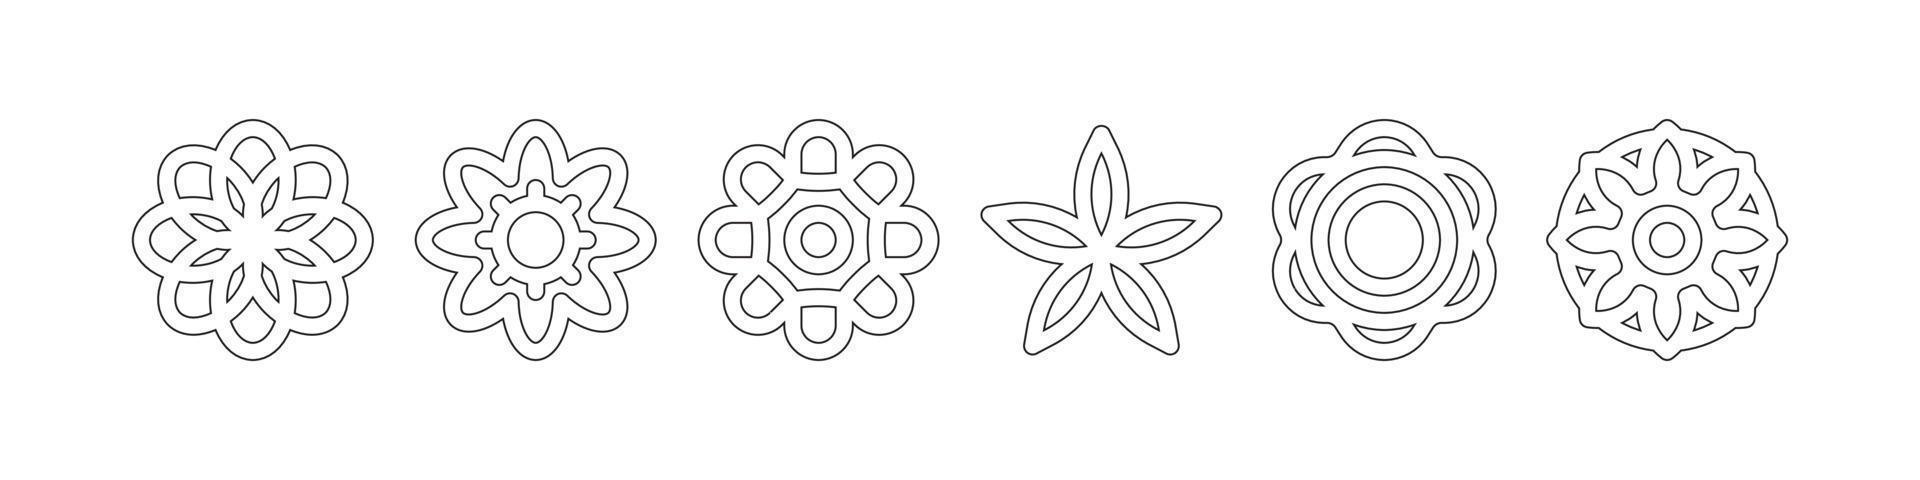 Flower icon geometry shape vector art isolated on white background free download